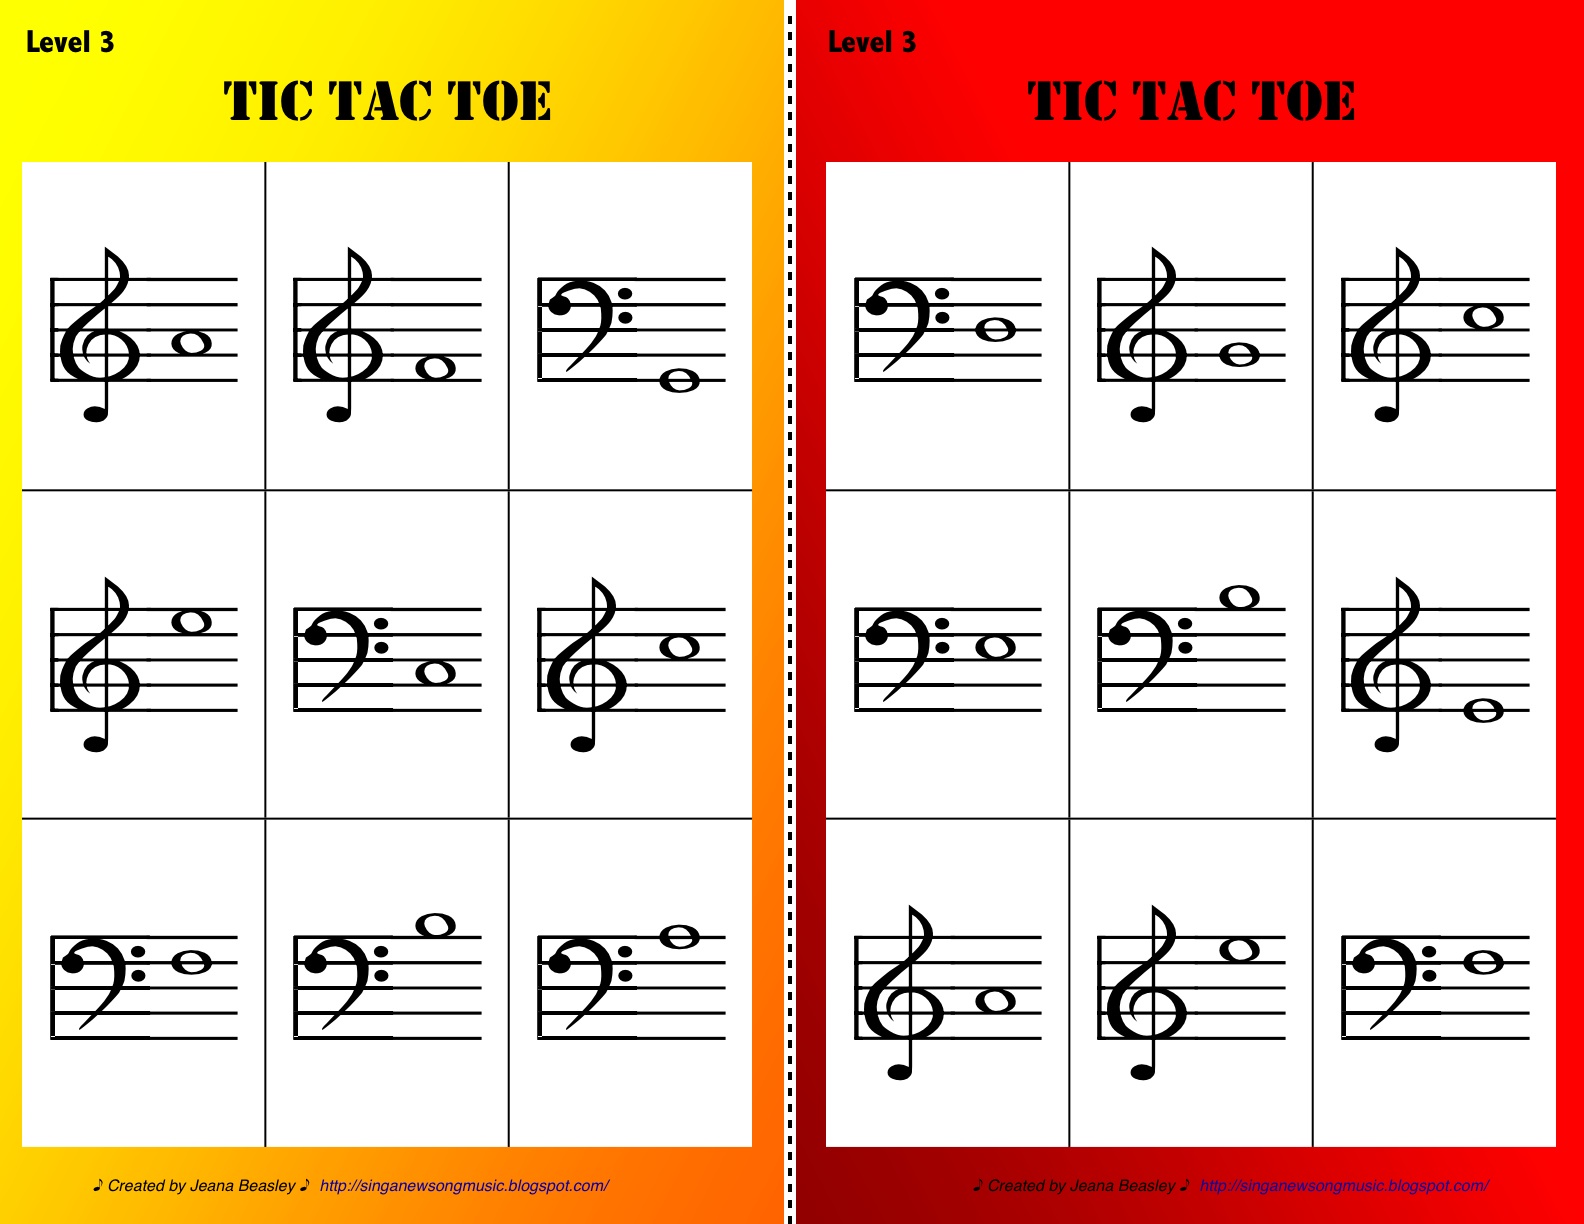 Sing a New Song: Tic Tac Toe Levels 1-3